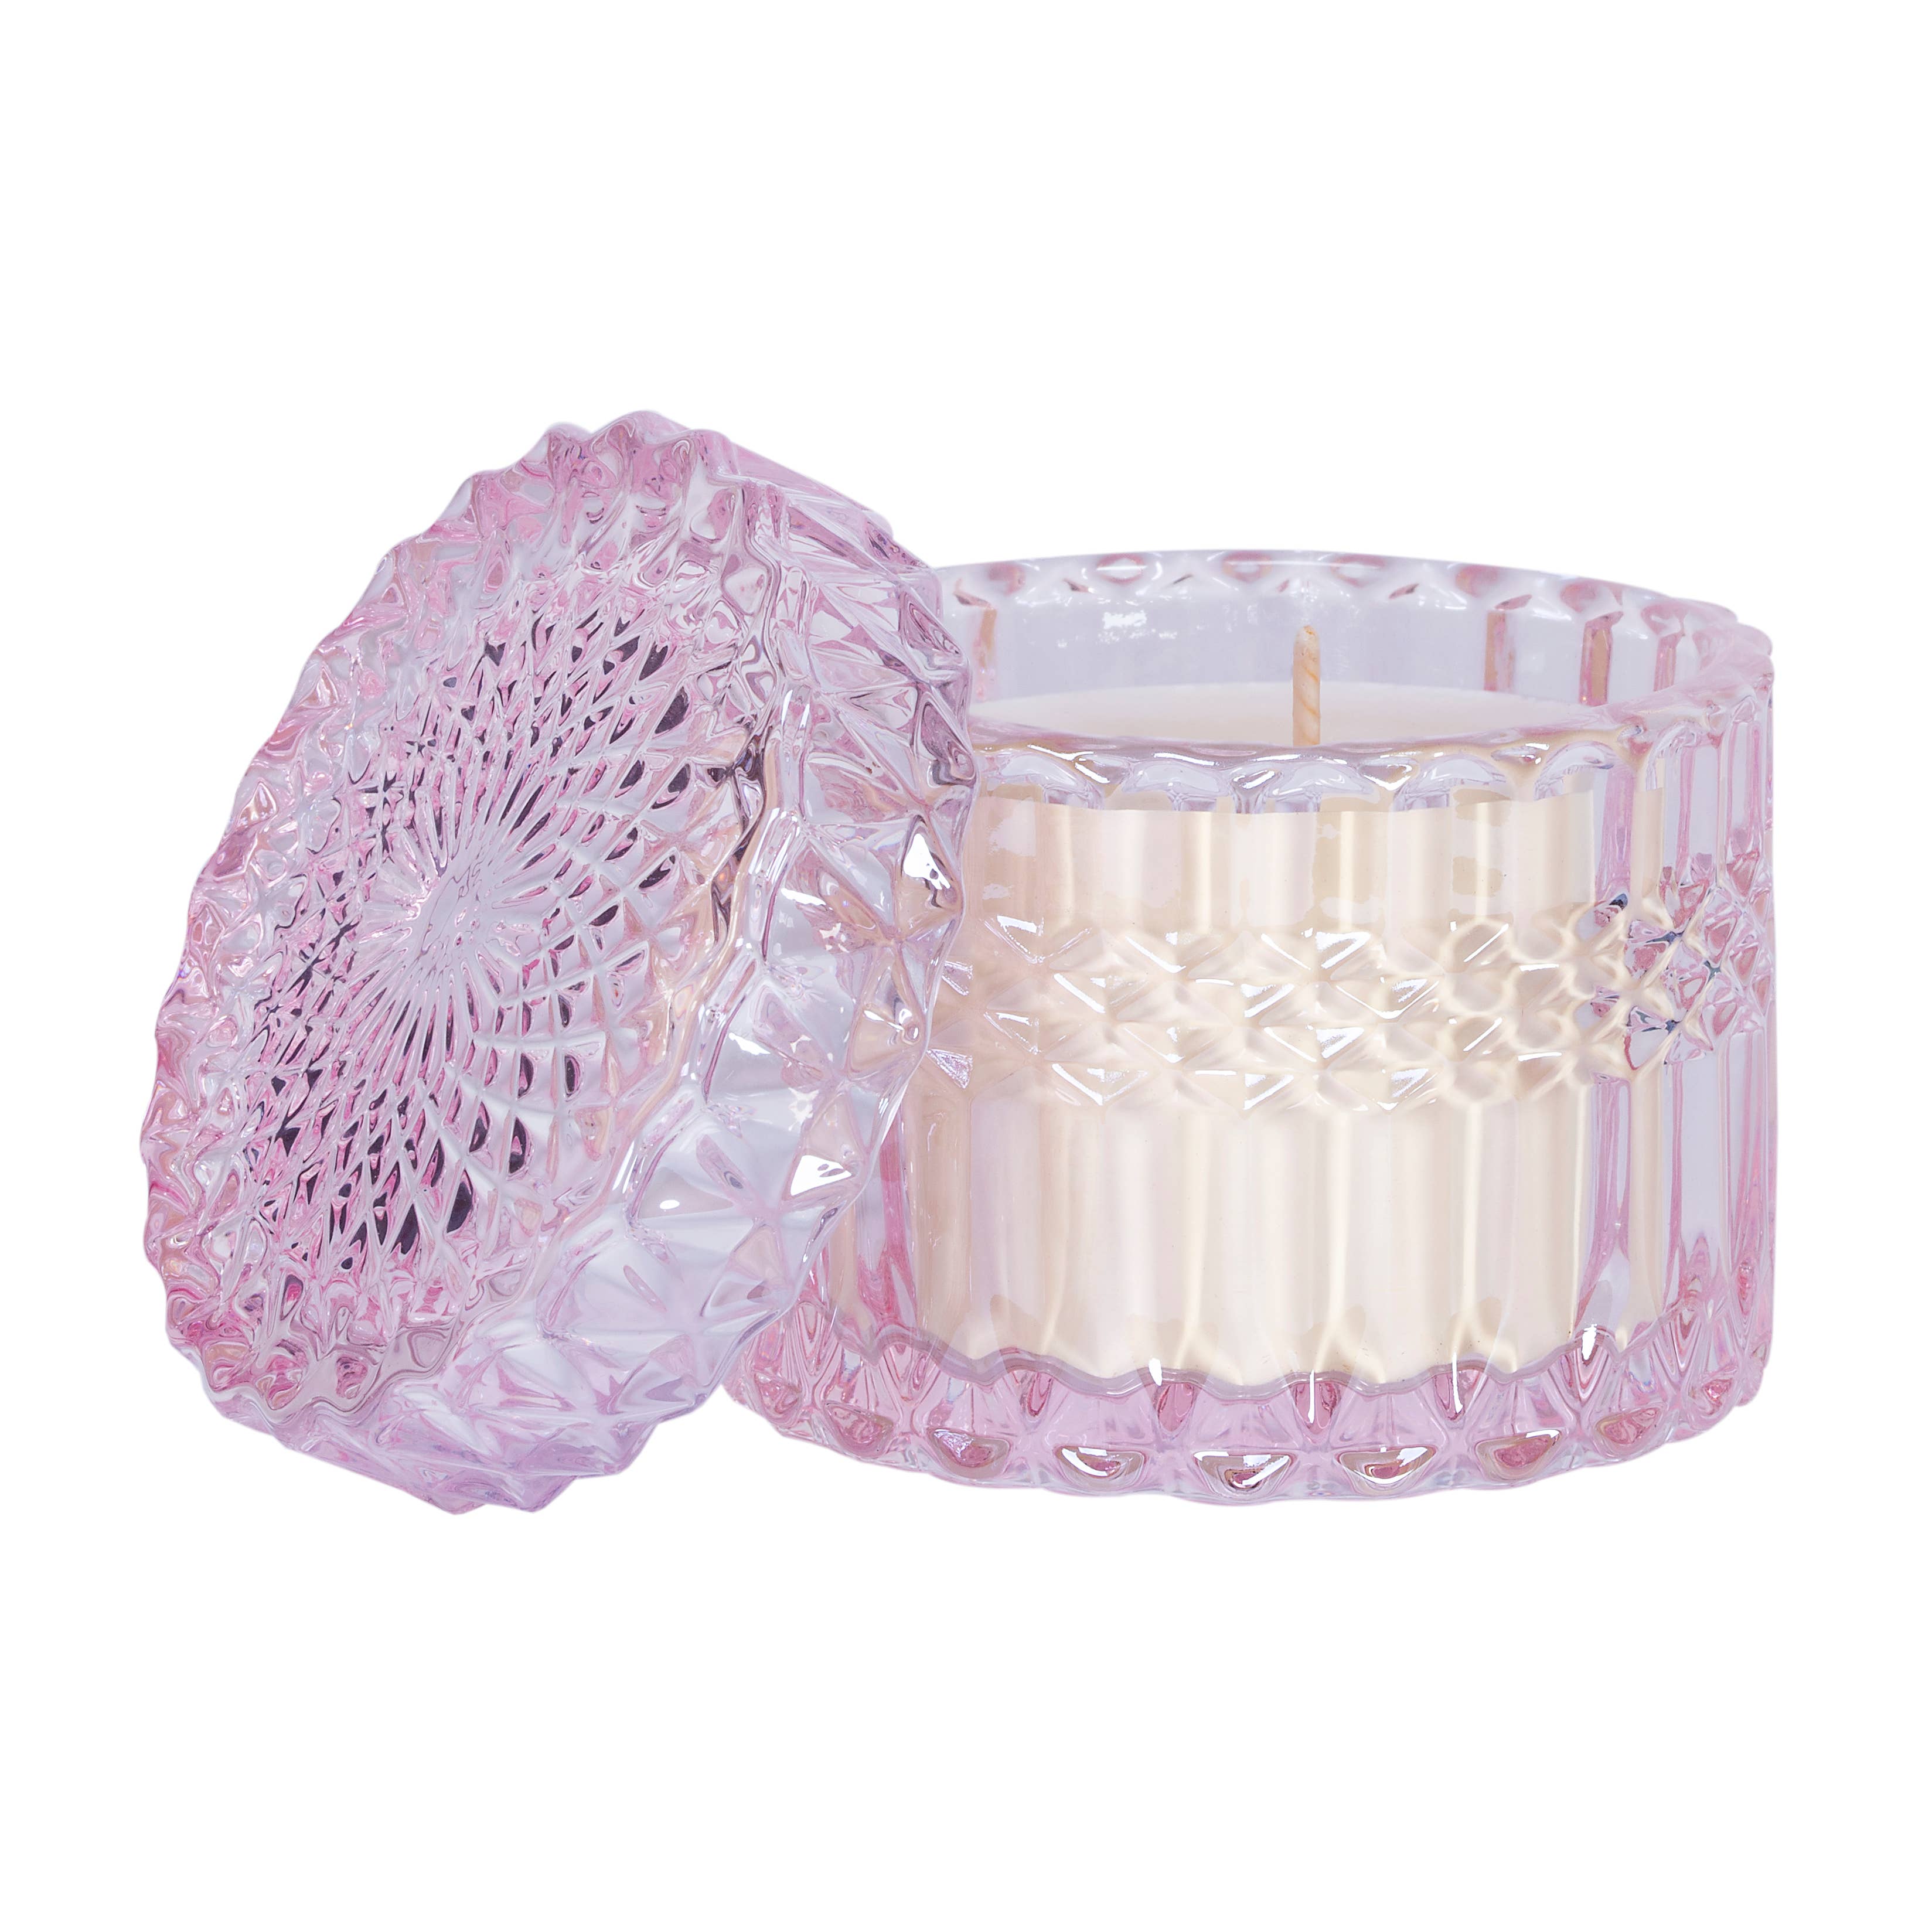 Peony Petite Shimmer Candle 8oz